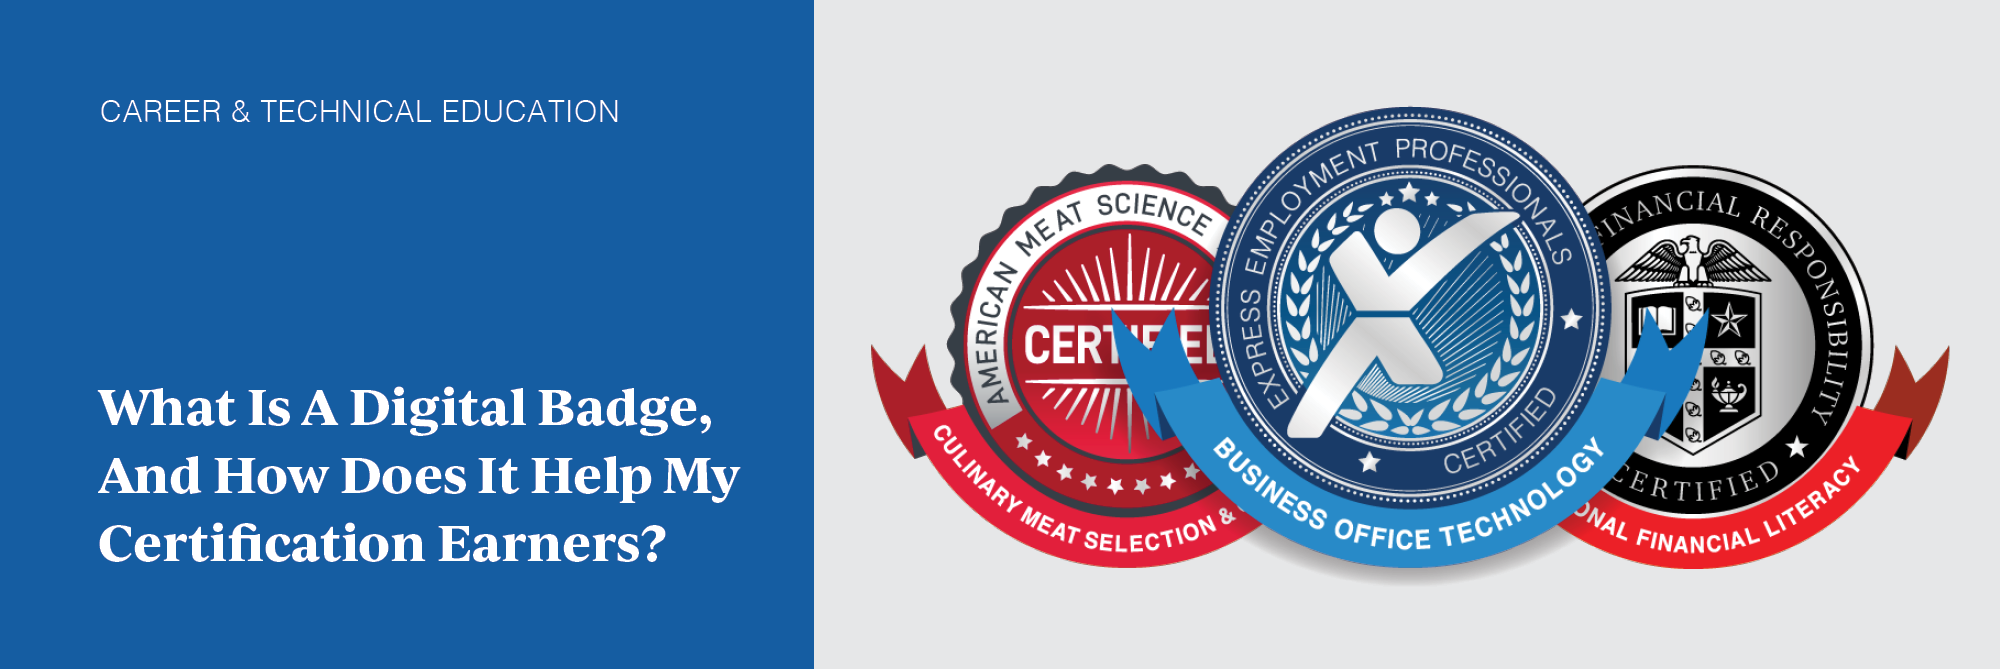 What Is A Digital Badge, and How Does It Help My Certification Earners?